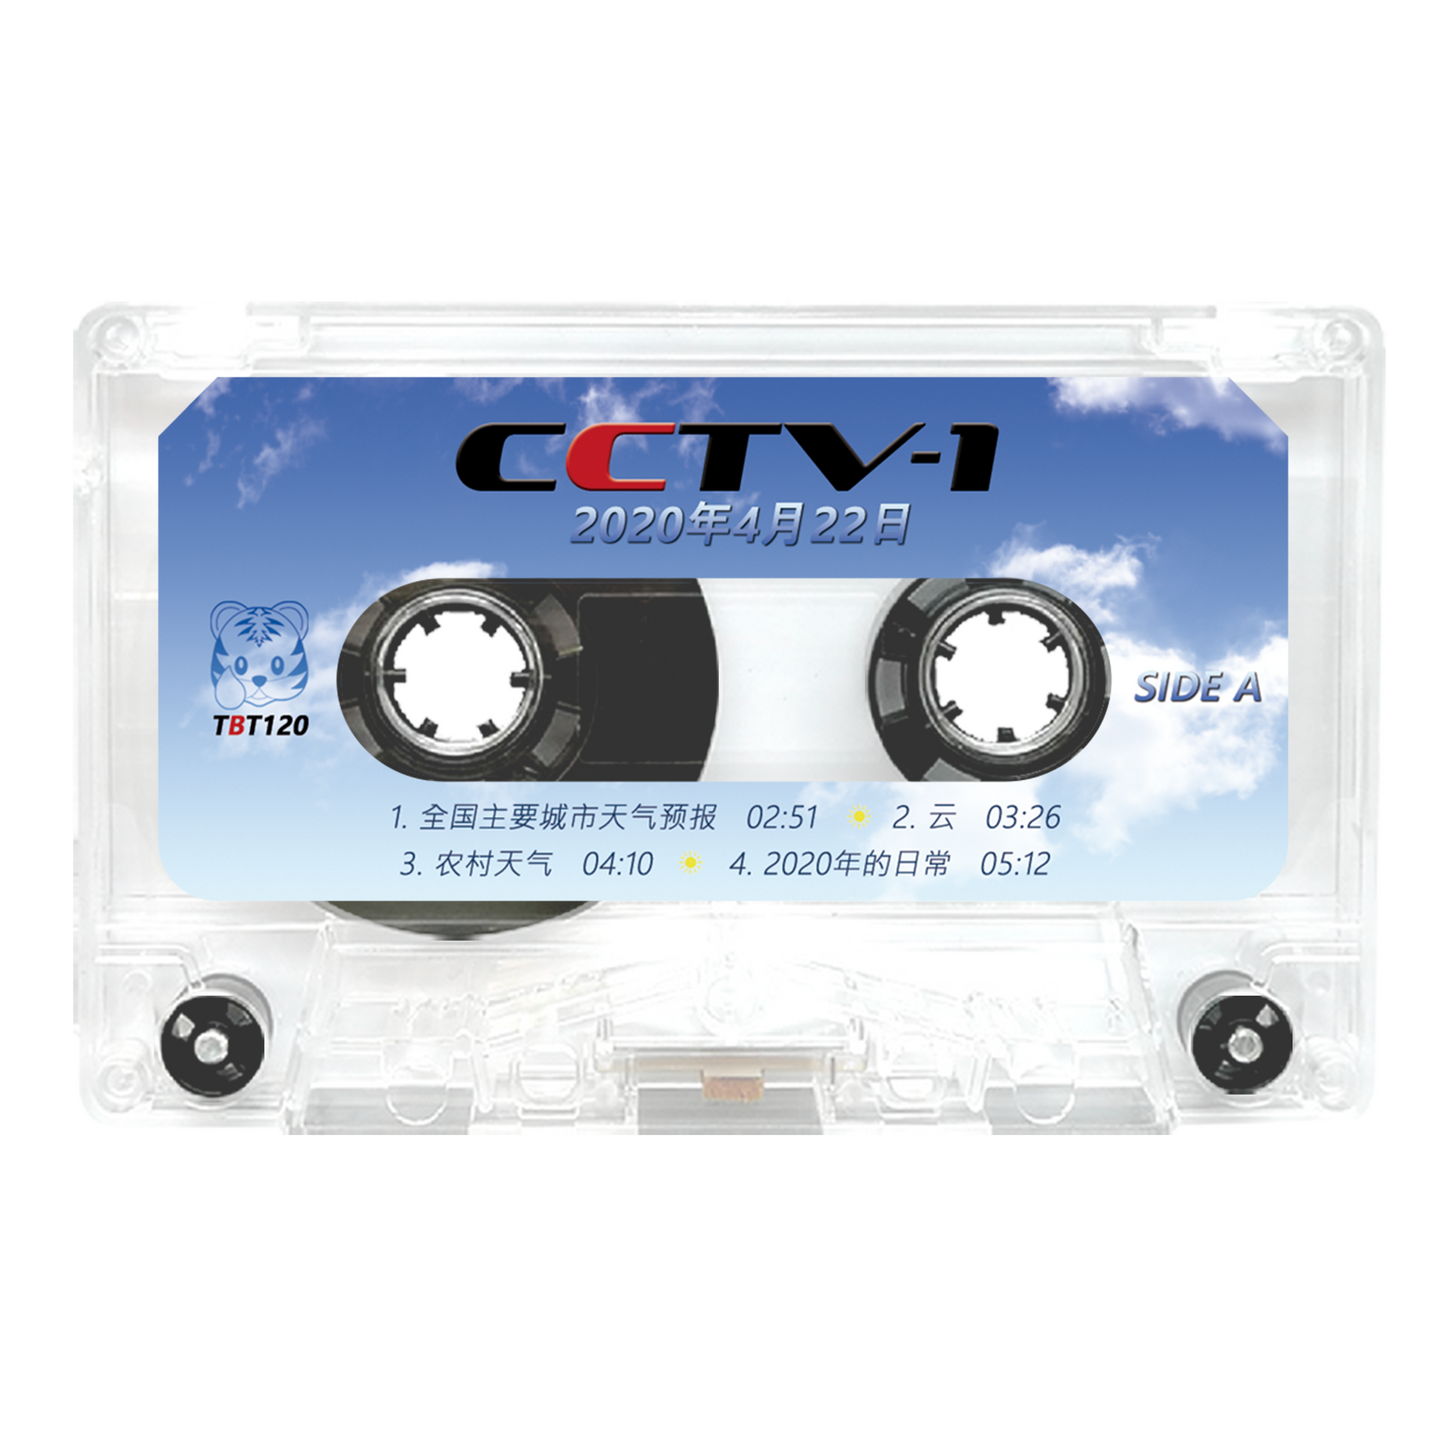 ᑕᑕTᐯ-1 - "2020年4月22日" Limited Edition Cassette Tape